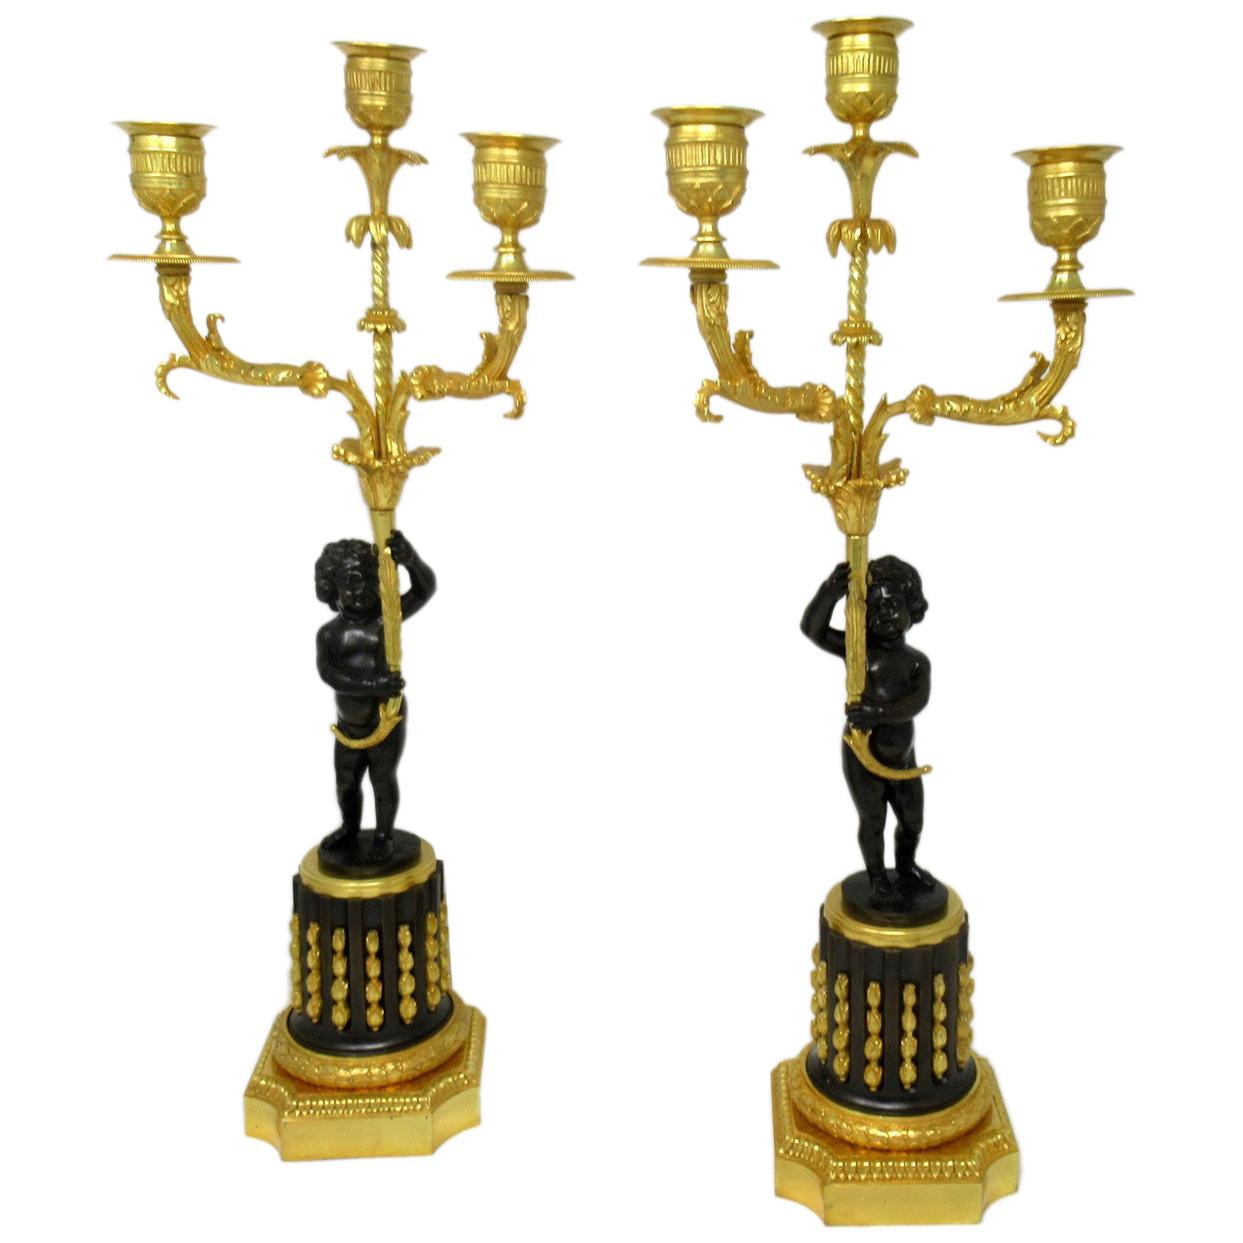 French Regency Empire Ormolu Bronze Candelabra Pierre-Philippe Thomire, Pair For Sale